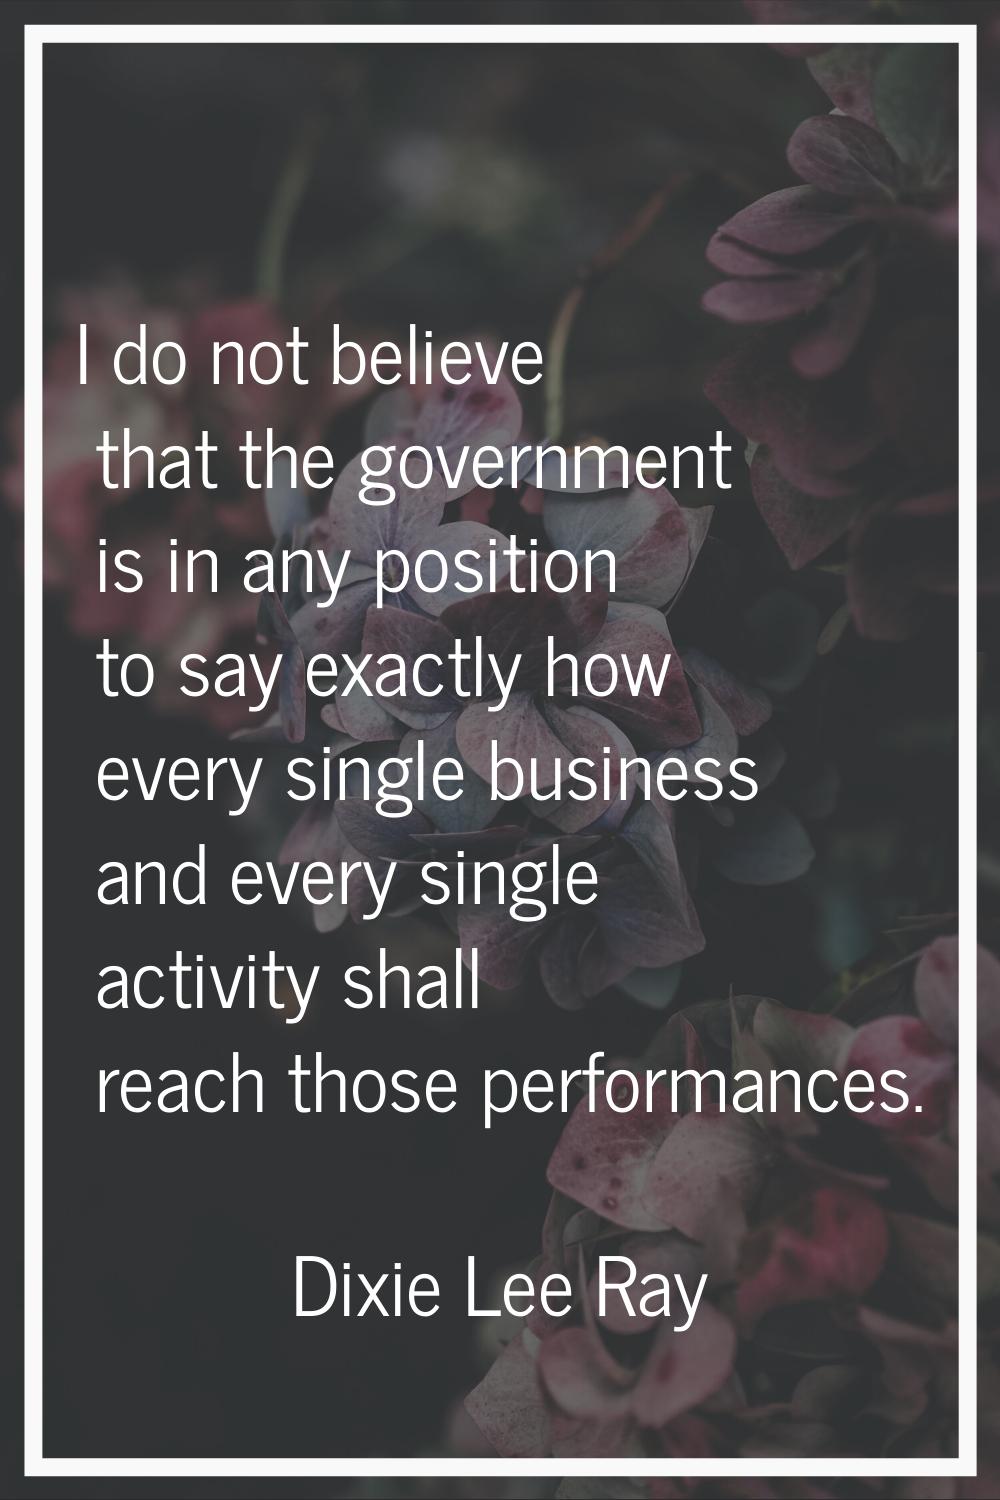 I do not believe that the government is in any position to say exactly how every single business an